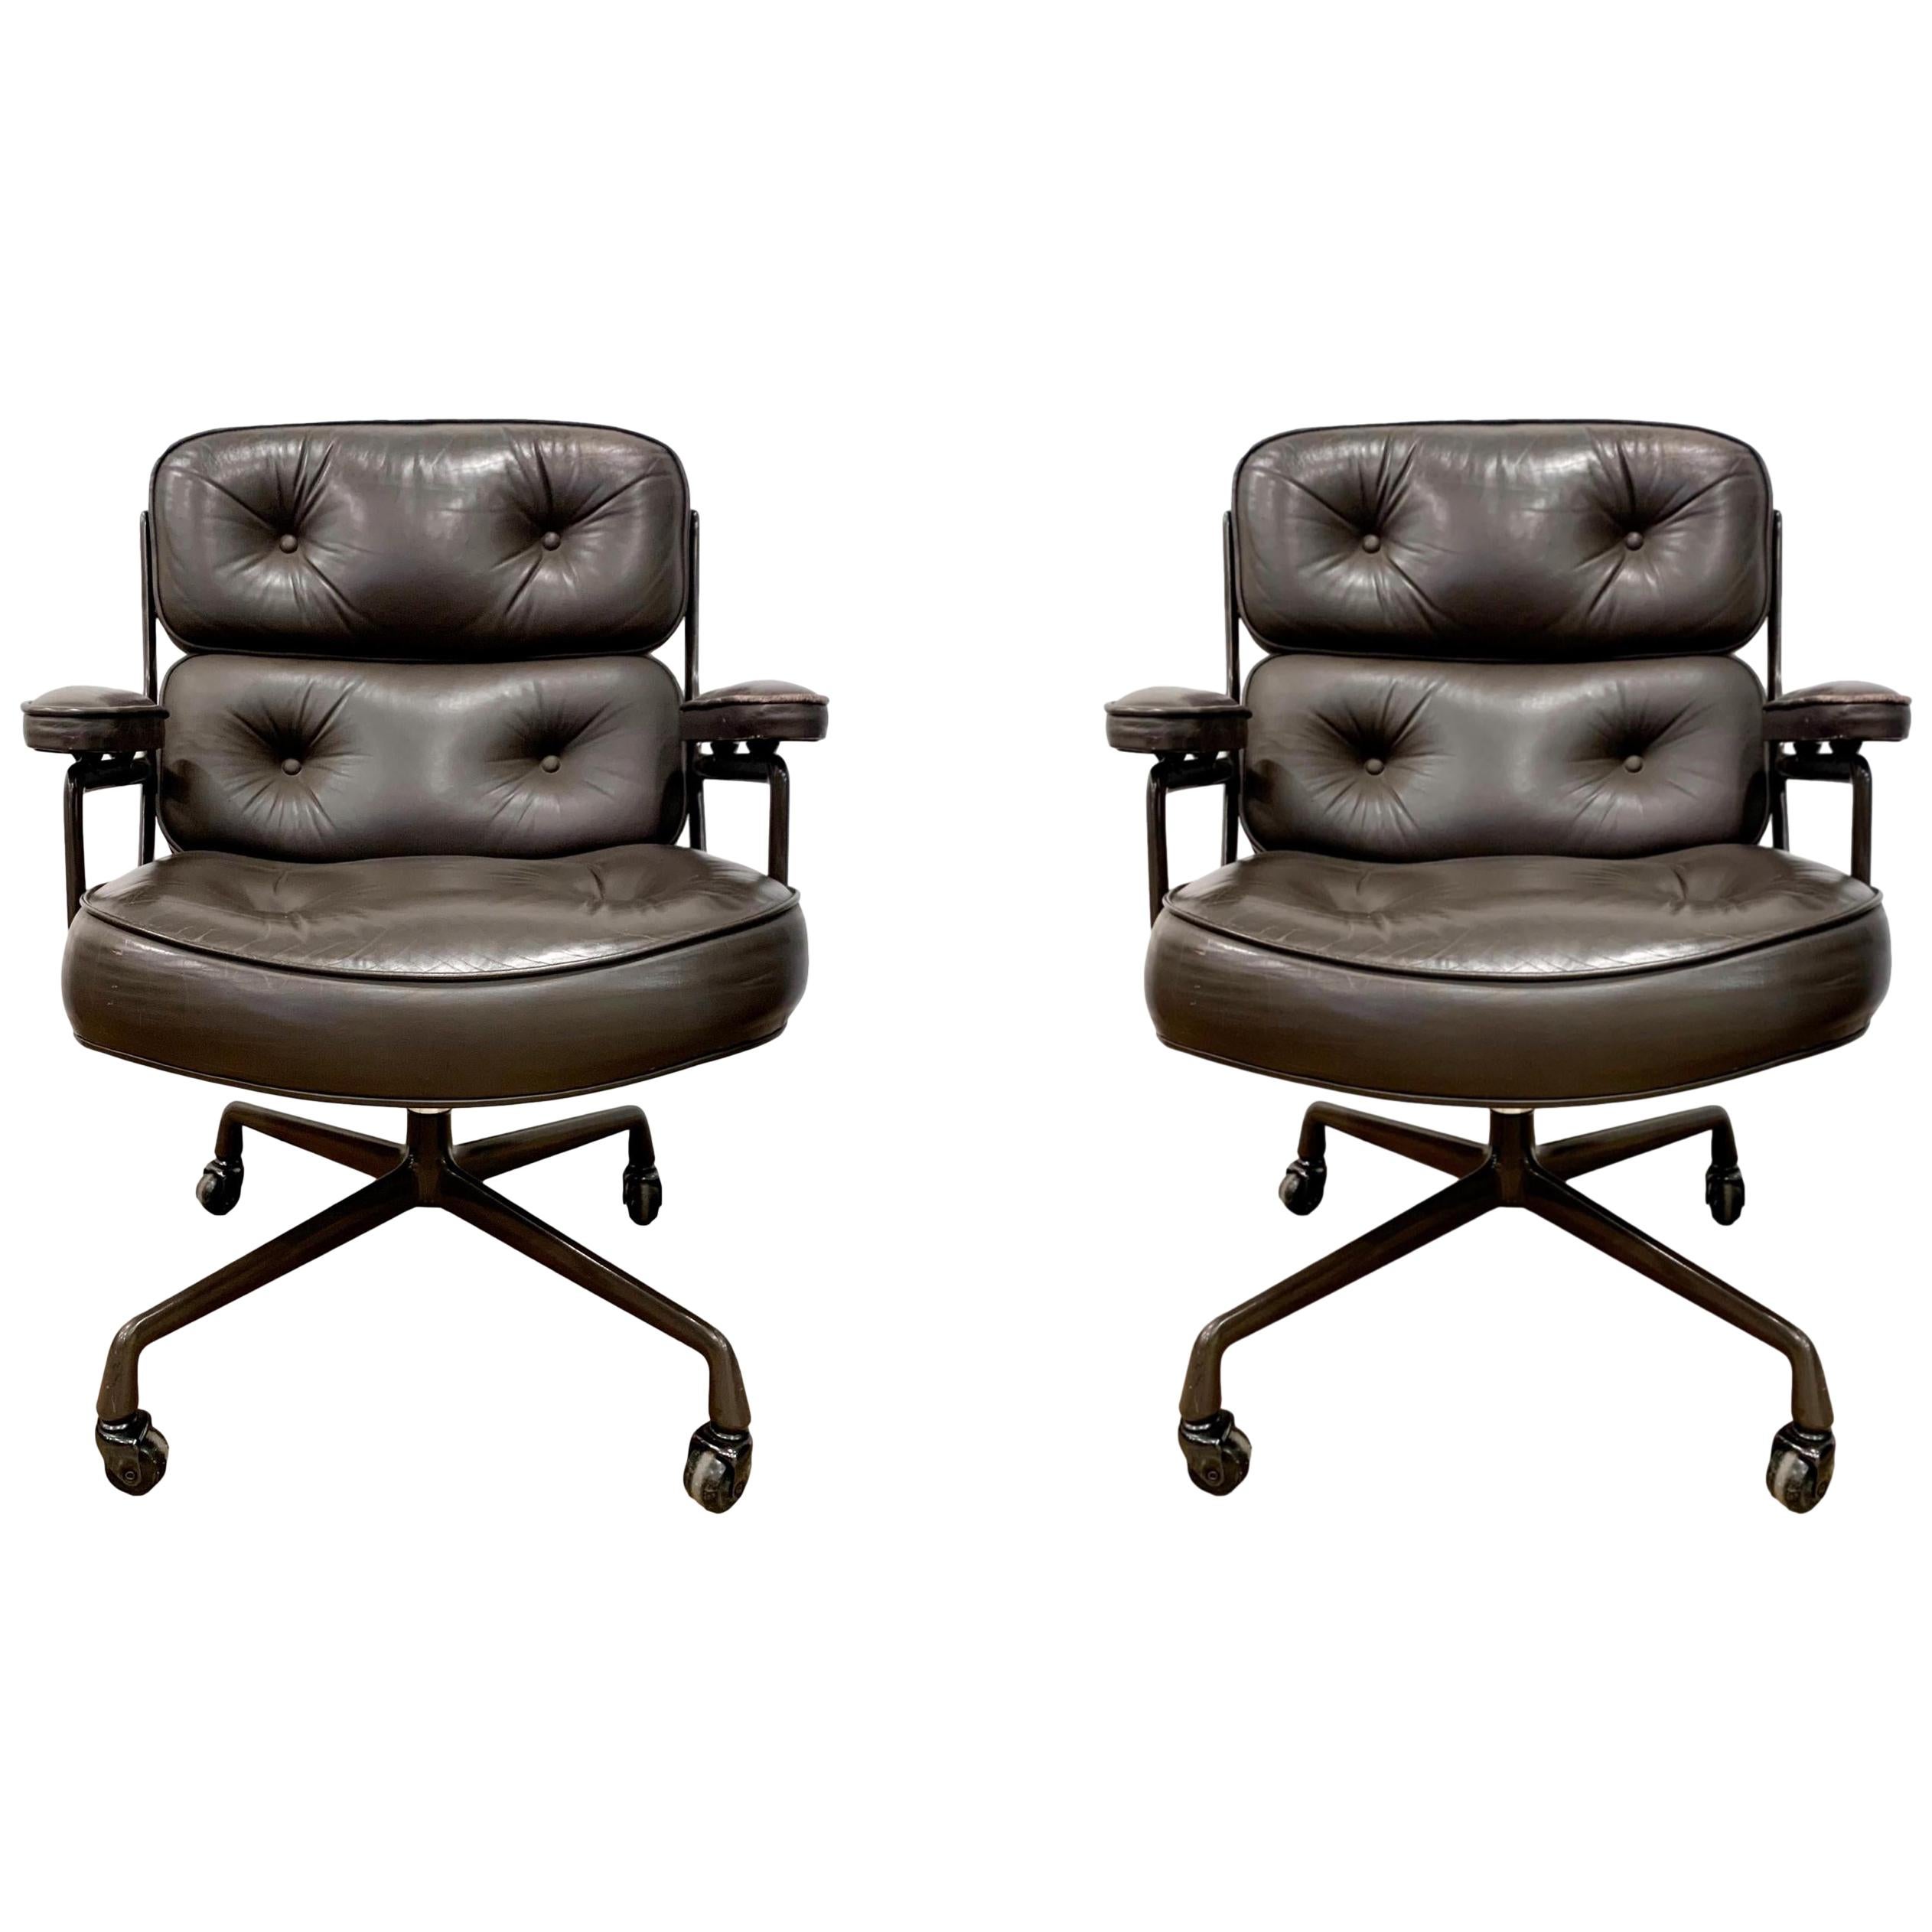 Original Eames Time Life Chair in Olive Brown Leather